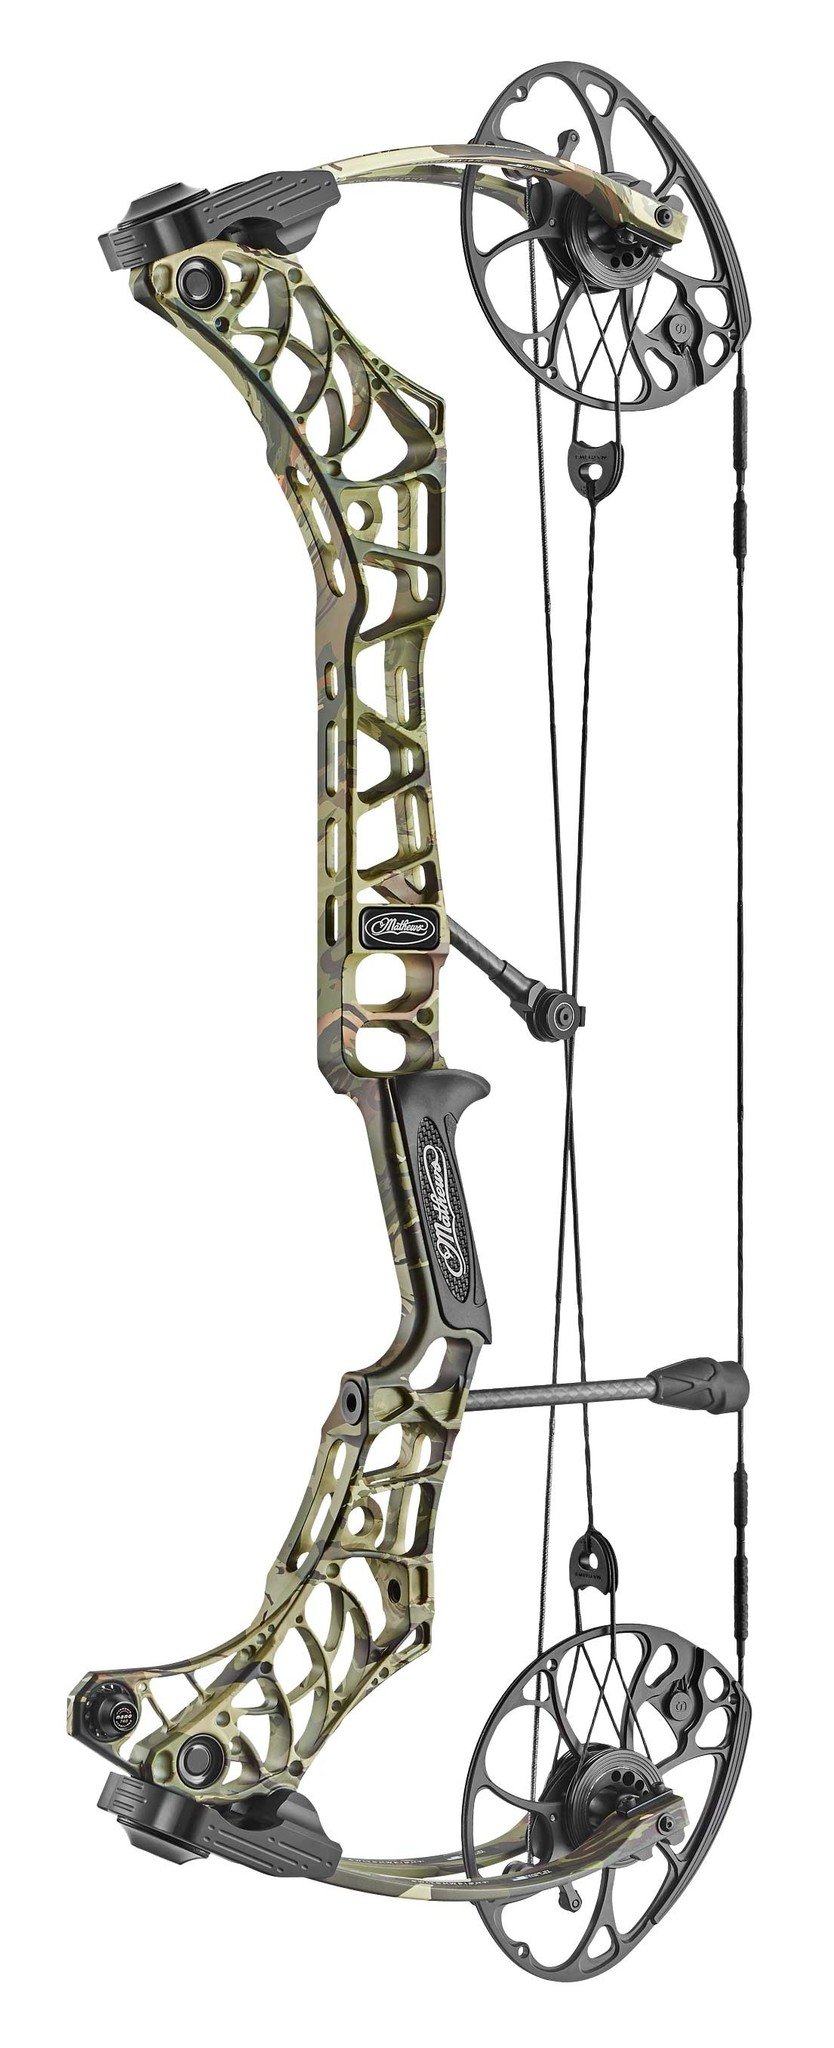 mathews bow serial number identification